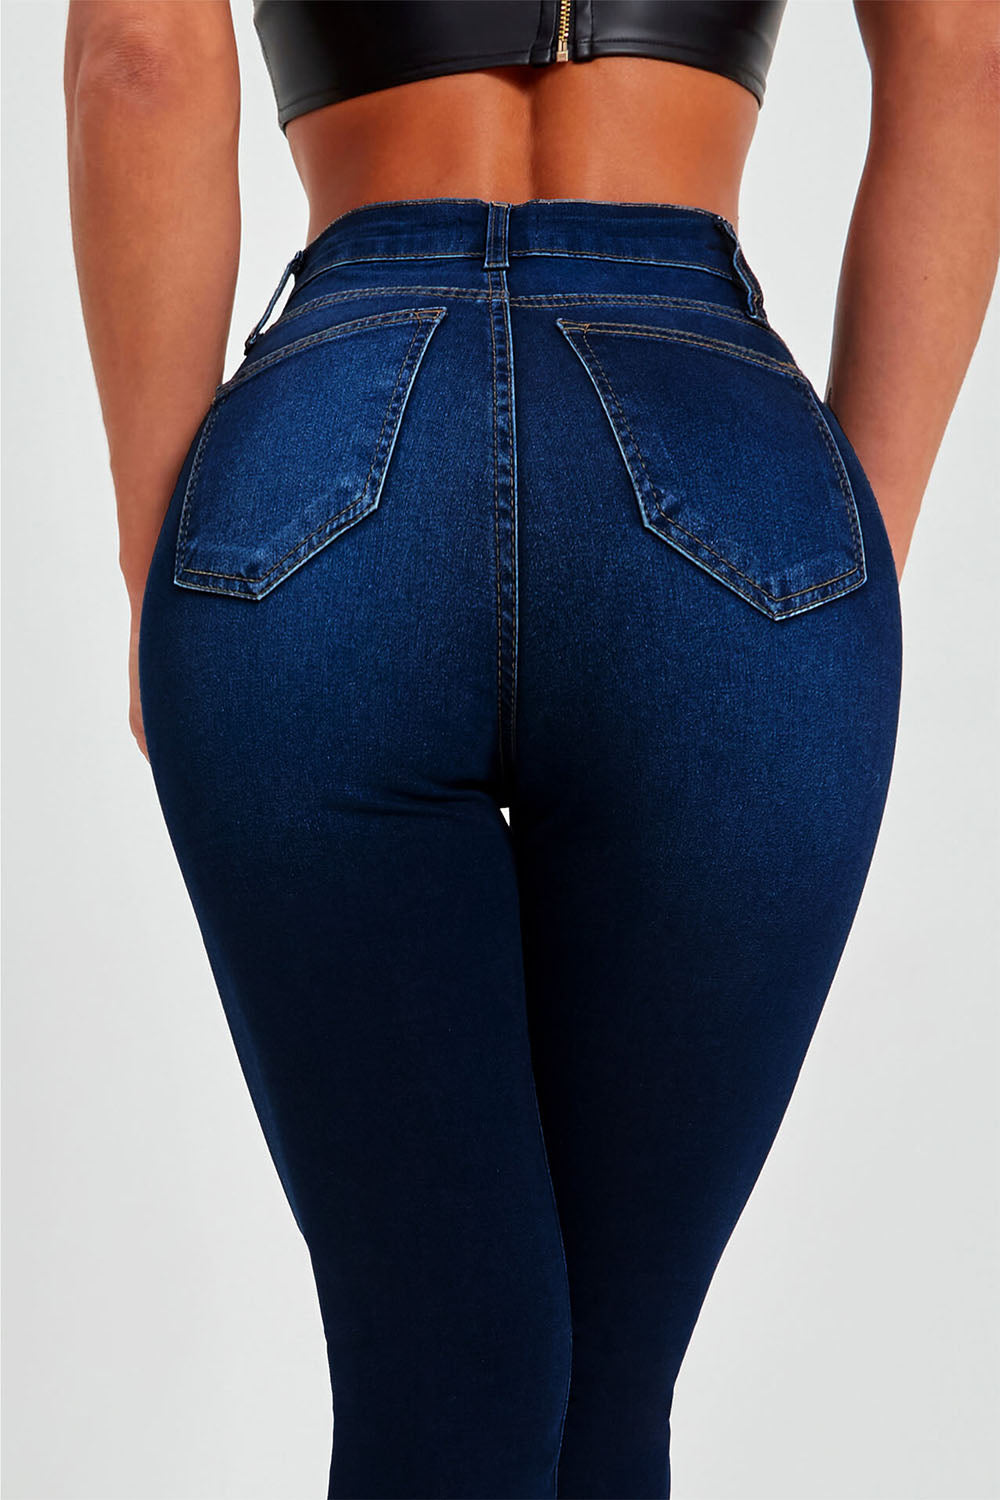 Buttoned Skinny Jeans - Bottoms - Pants - 8 - 2024